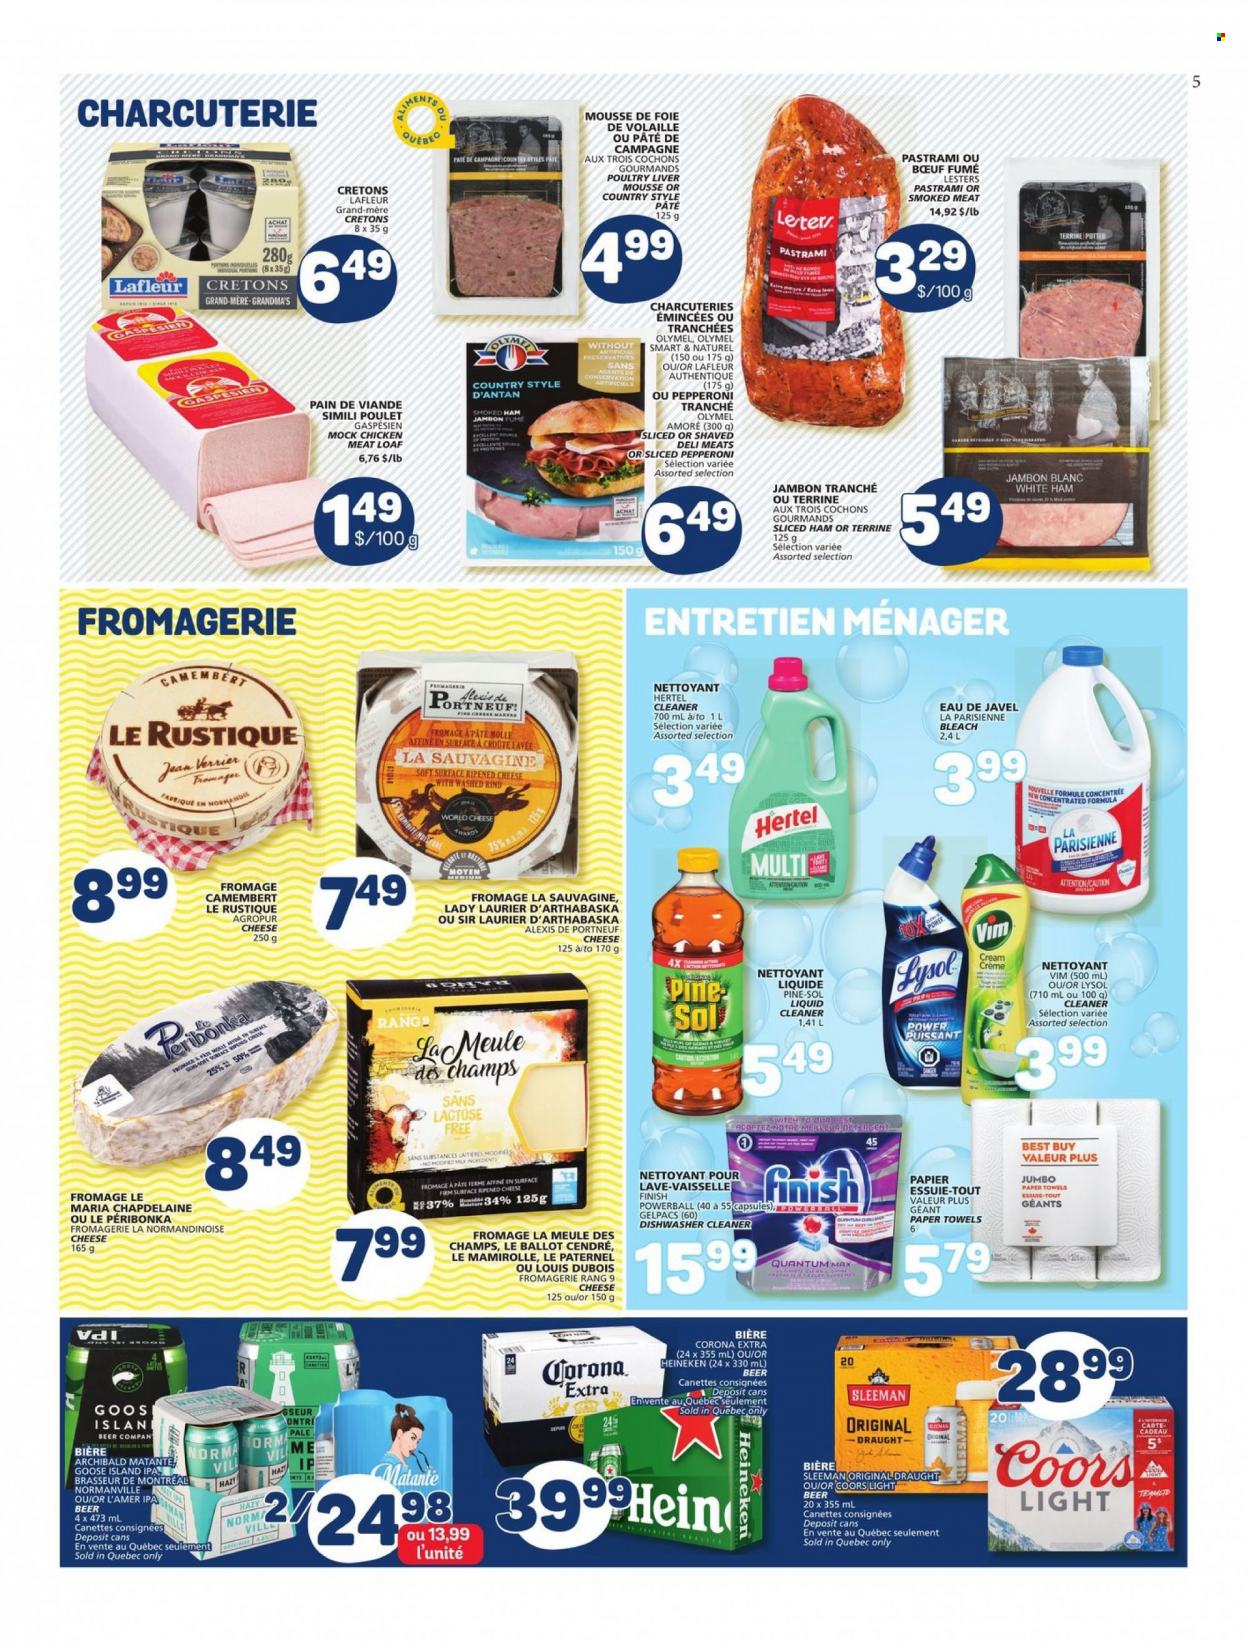 thumbnail - Marché Bonichoix Flyer - March 30, 2023 - April 05, 2023 - Sales products - ham, pastrami, smoked ham, pepperoni, cheese, milk, switch, beer, Corona Extra, Heineken, IPA, chicken, beef meat, eye of round, kitchen towels, paper towels, cleaner, bleach, liquid cleaner, Lysol, Pine-Sol, dishwashing liquid, dishwasher cleaner, Finish Powerball, camembert, detergent, Coors. Page 5.